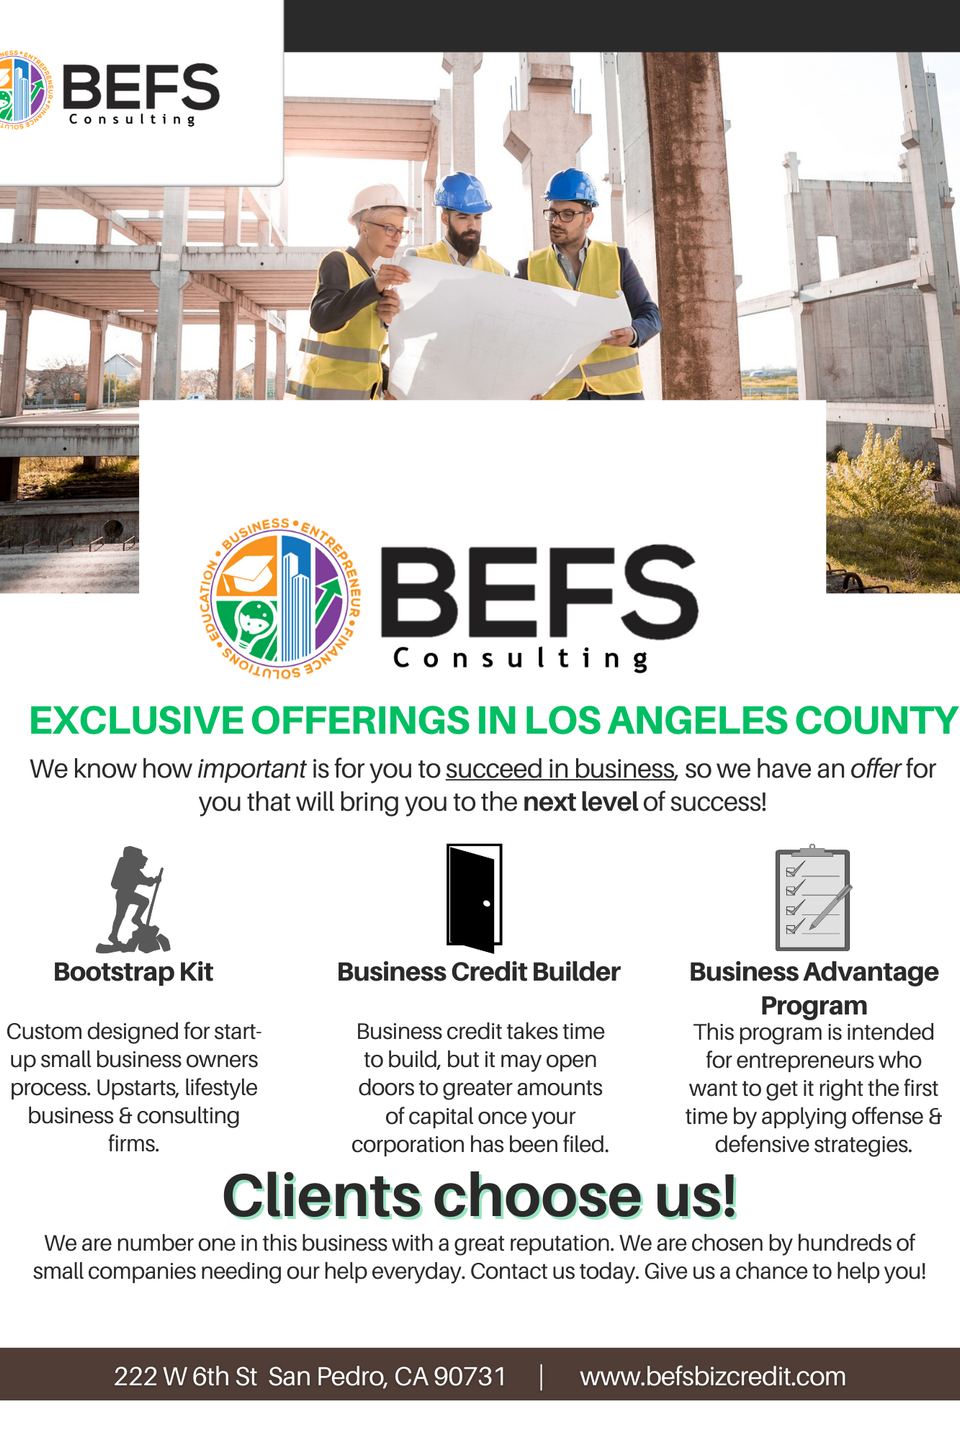 Befs consulting business services flyer